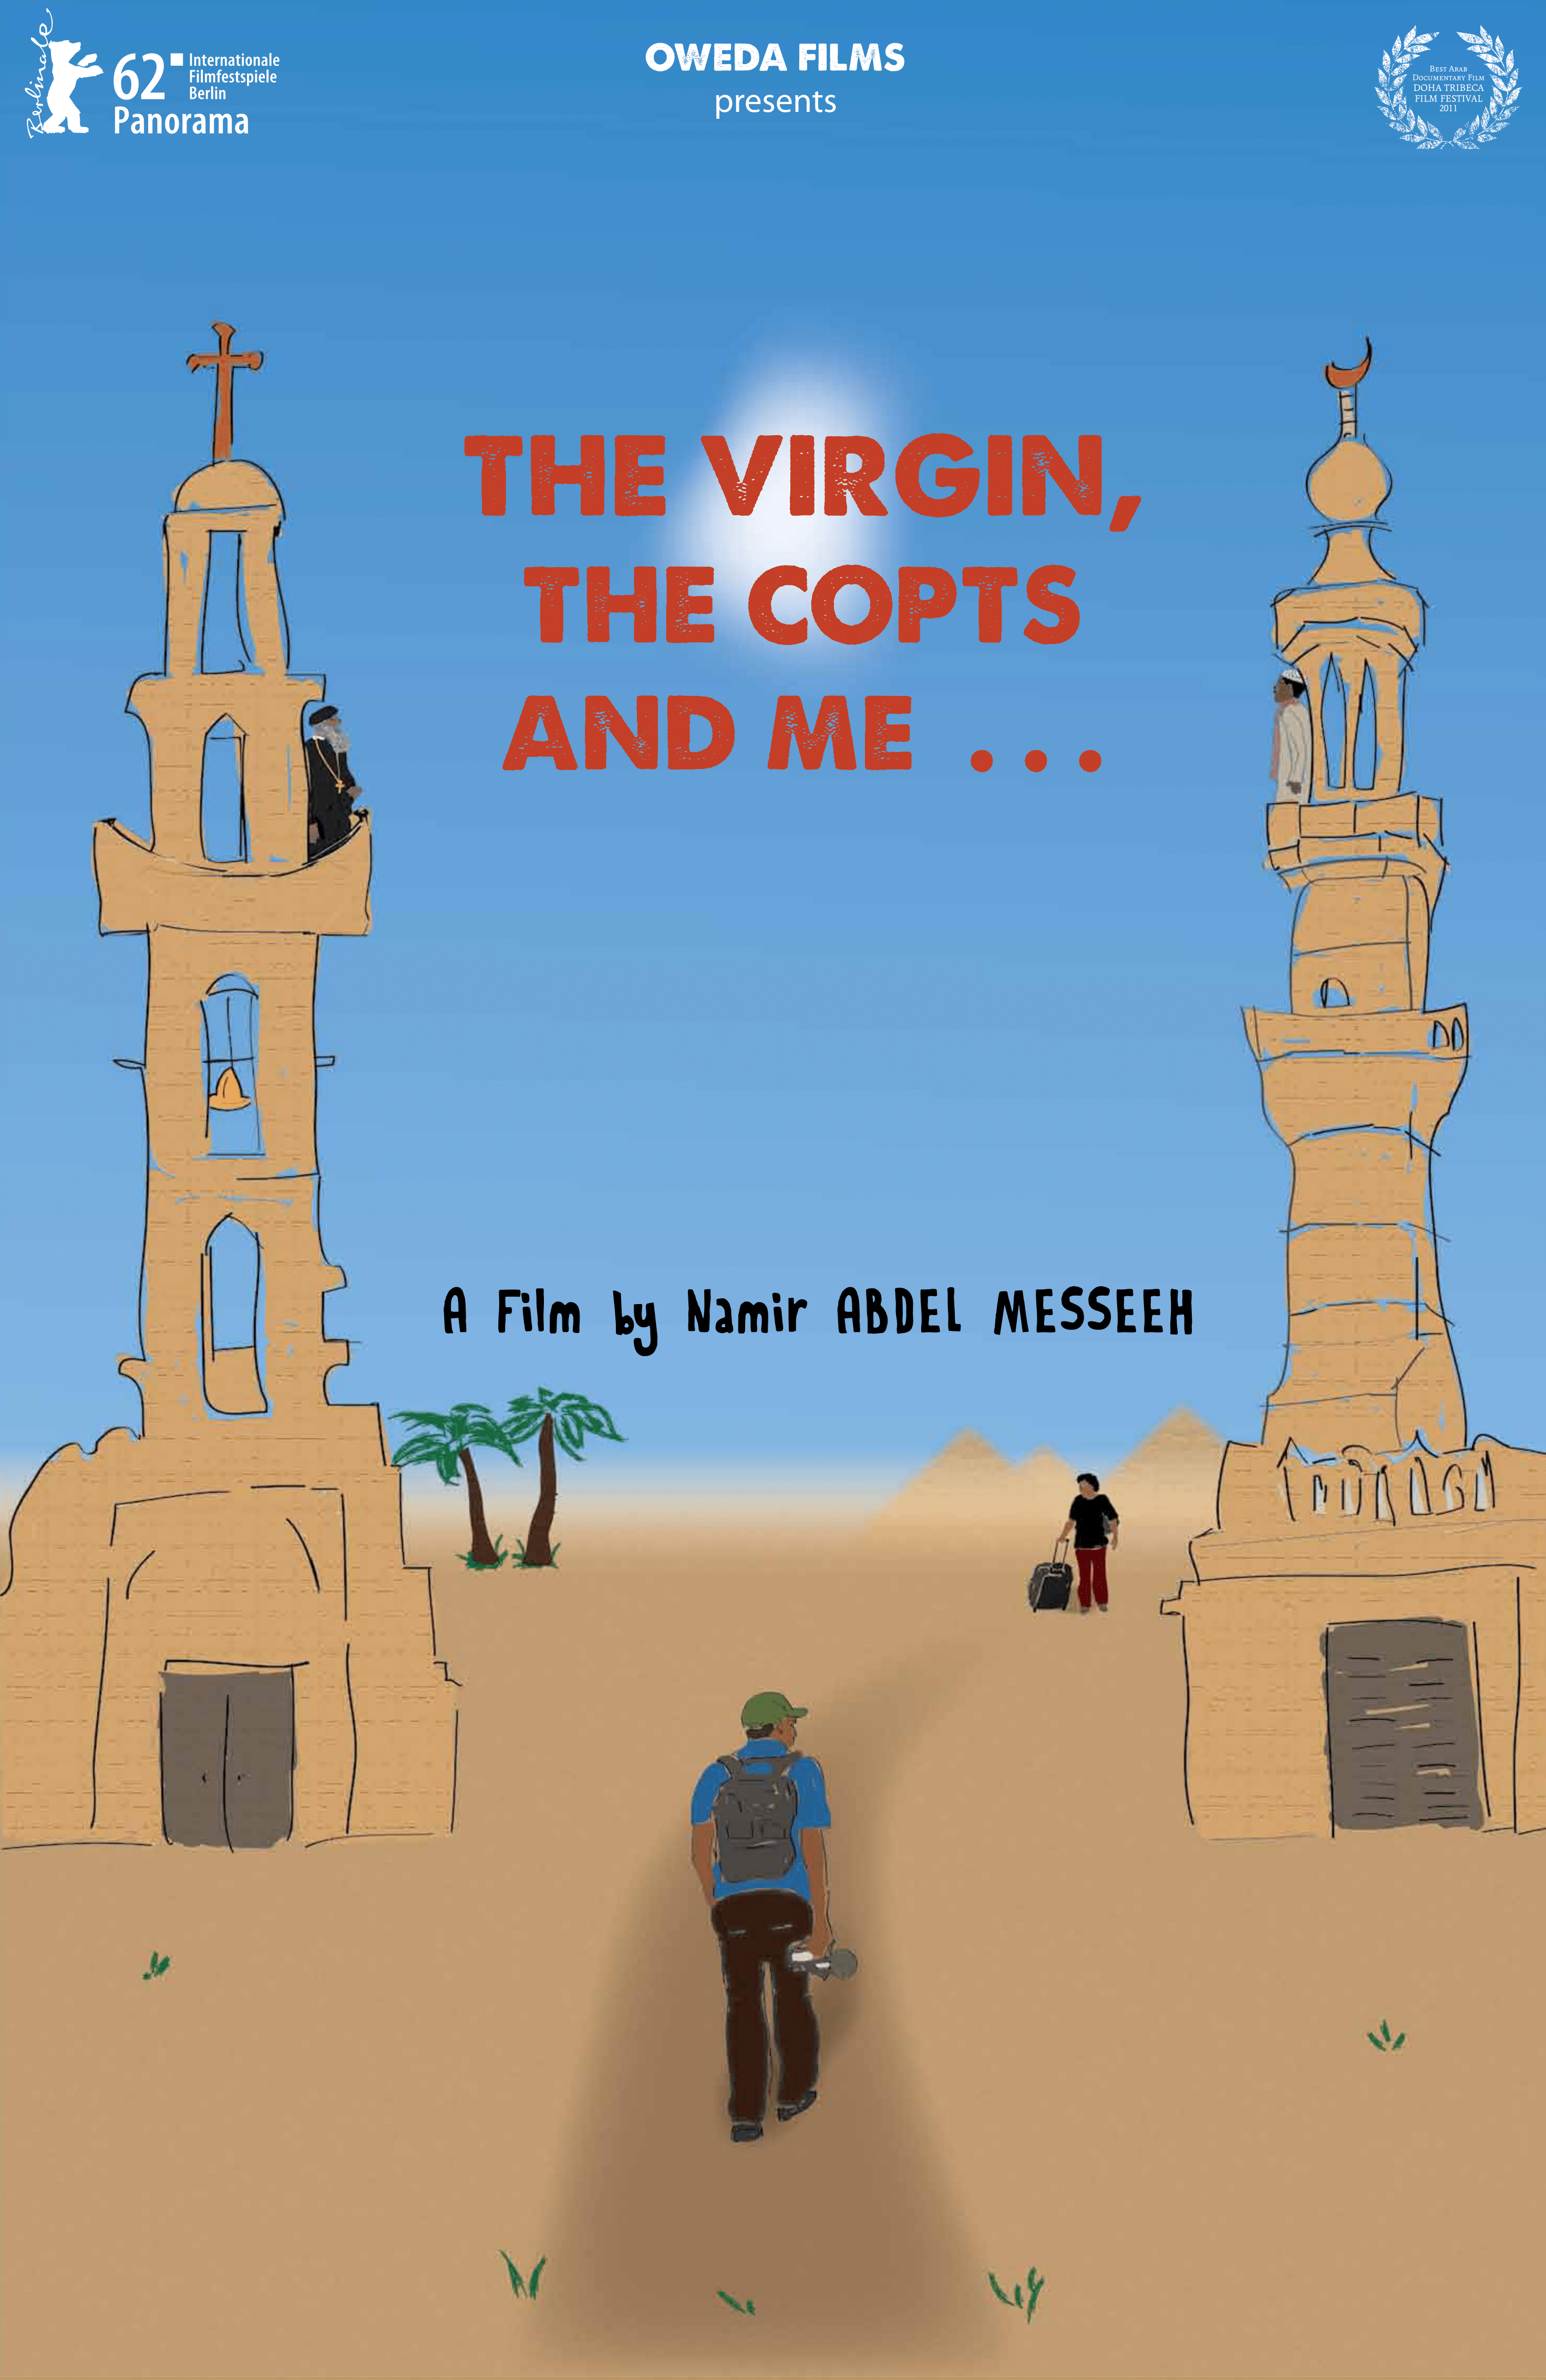 THE VIRGIN, THE COPTS AND ME - Poster